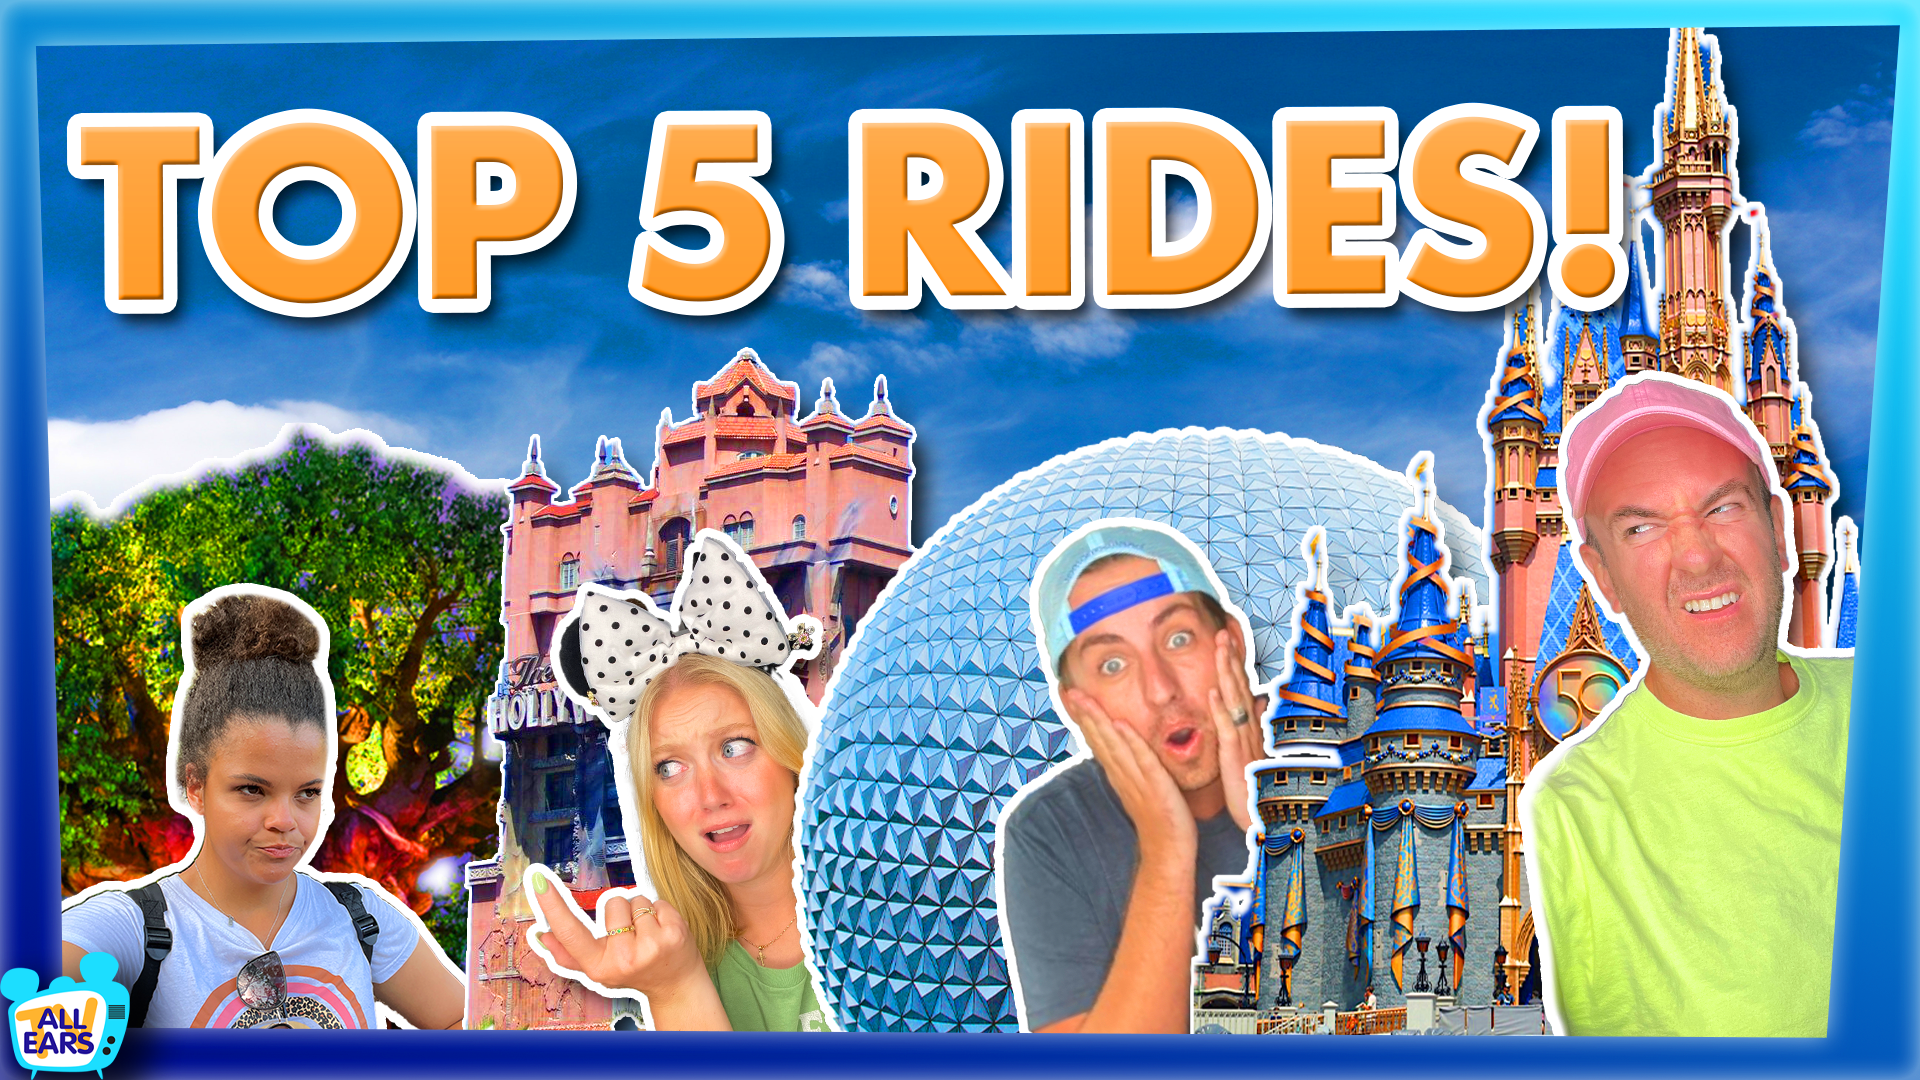 AllEars TV: The BEST and WORST Rides in Universal's Islands of Adventure 